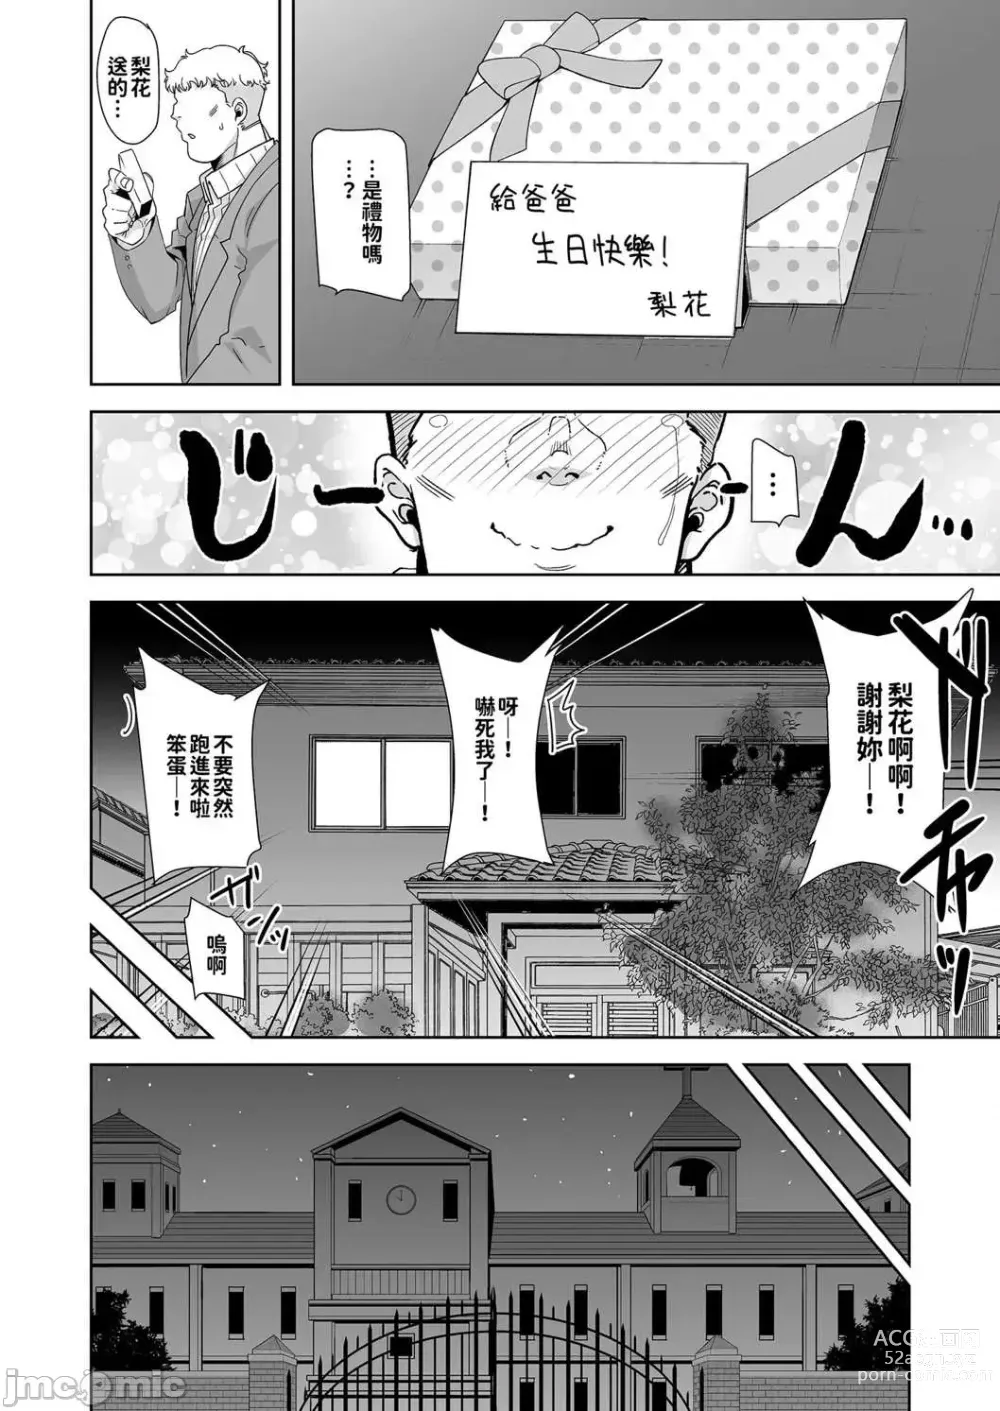 Page 94 of doujinshi Seika Girls Academys Officially Approved Prostitute Man 1 + 2 + 3